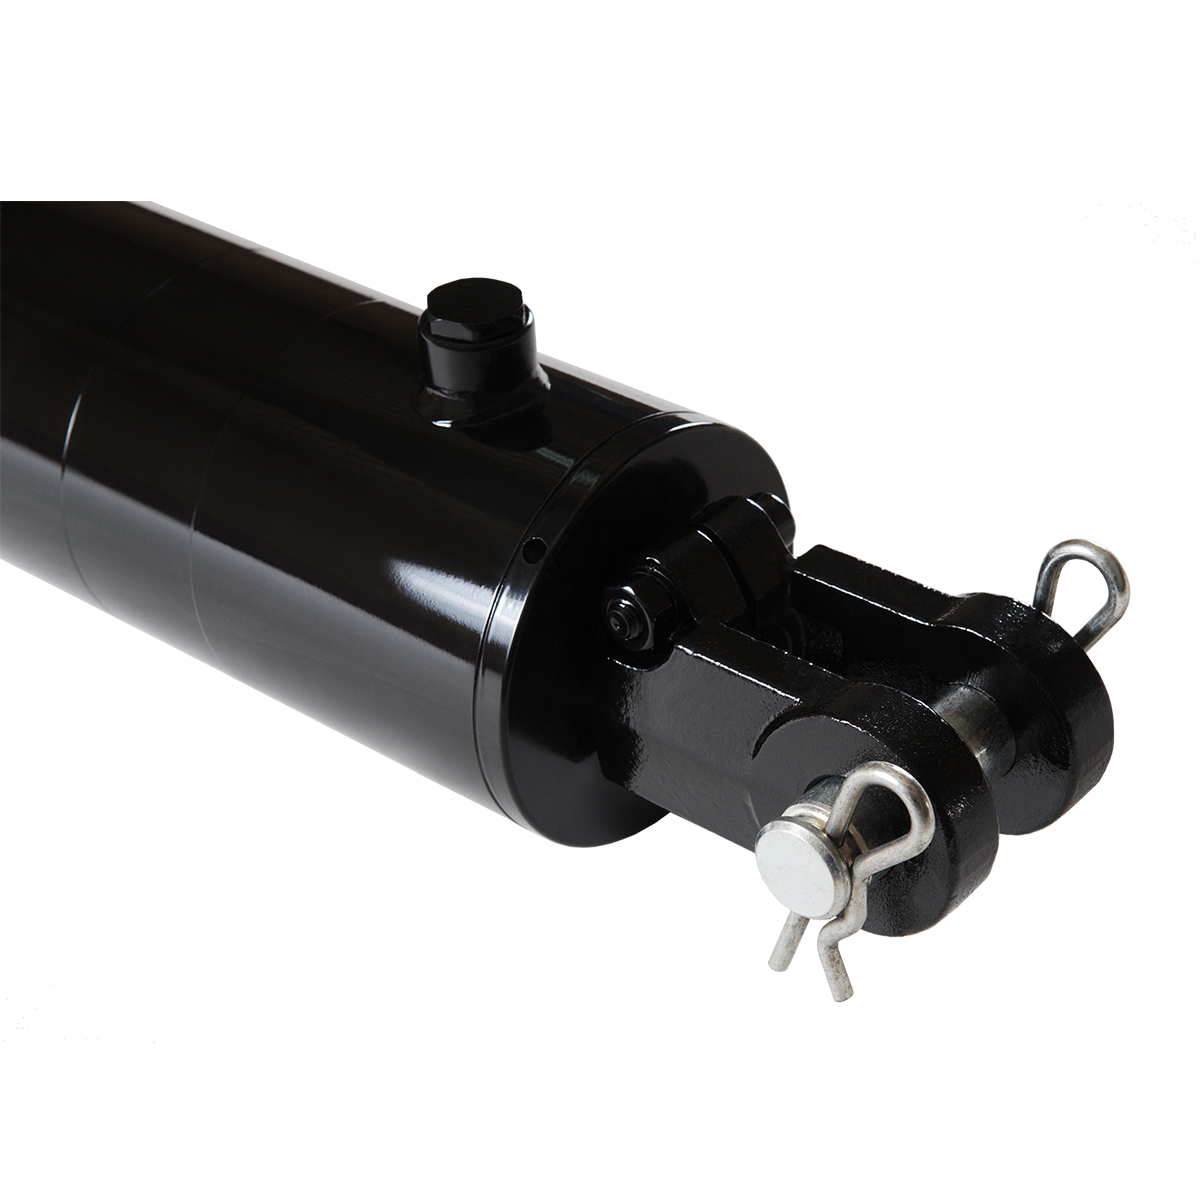 4 bore x 18 stroke hydraulic cylinder, welded clevis double acting cylinder | Magister Hydraulics